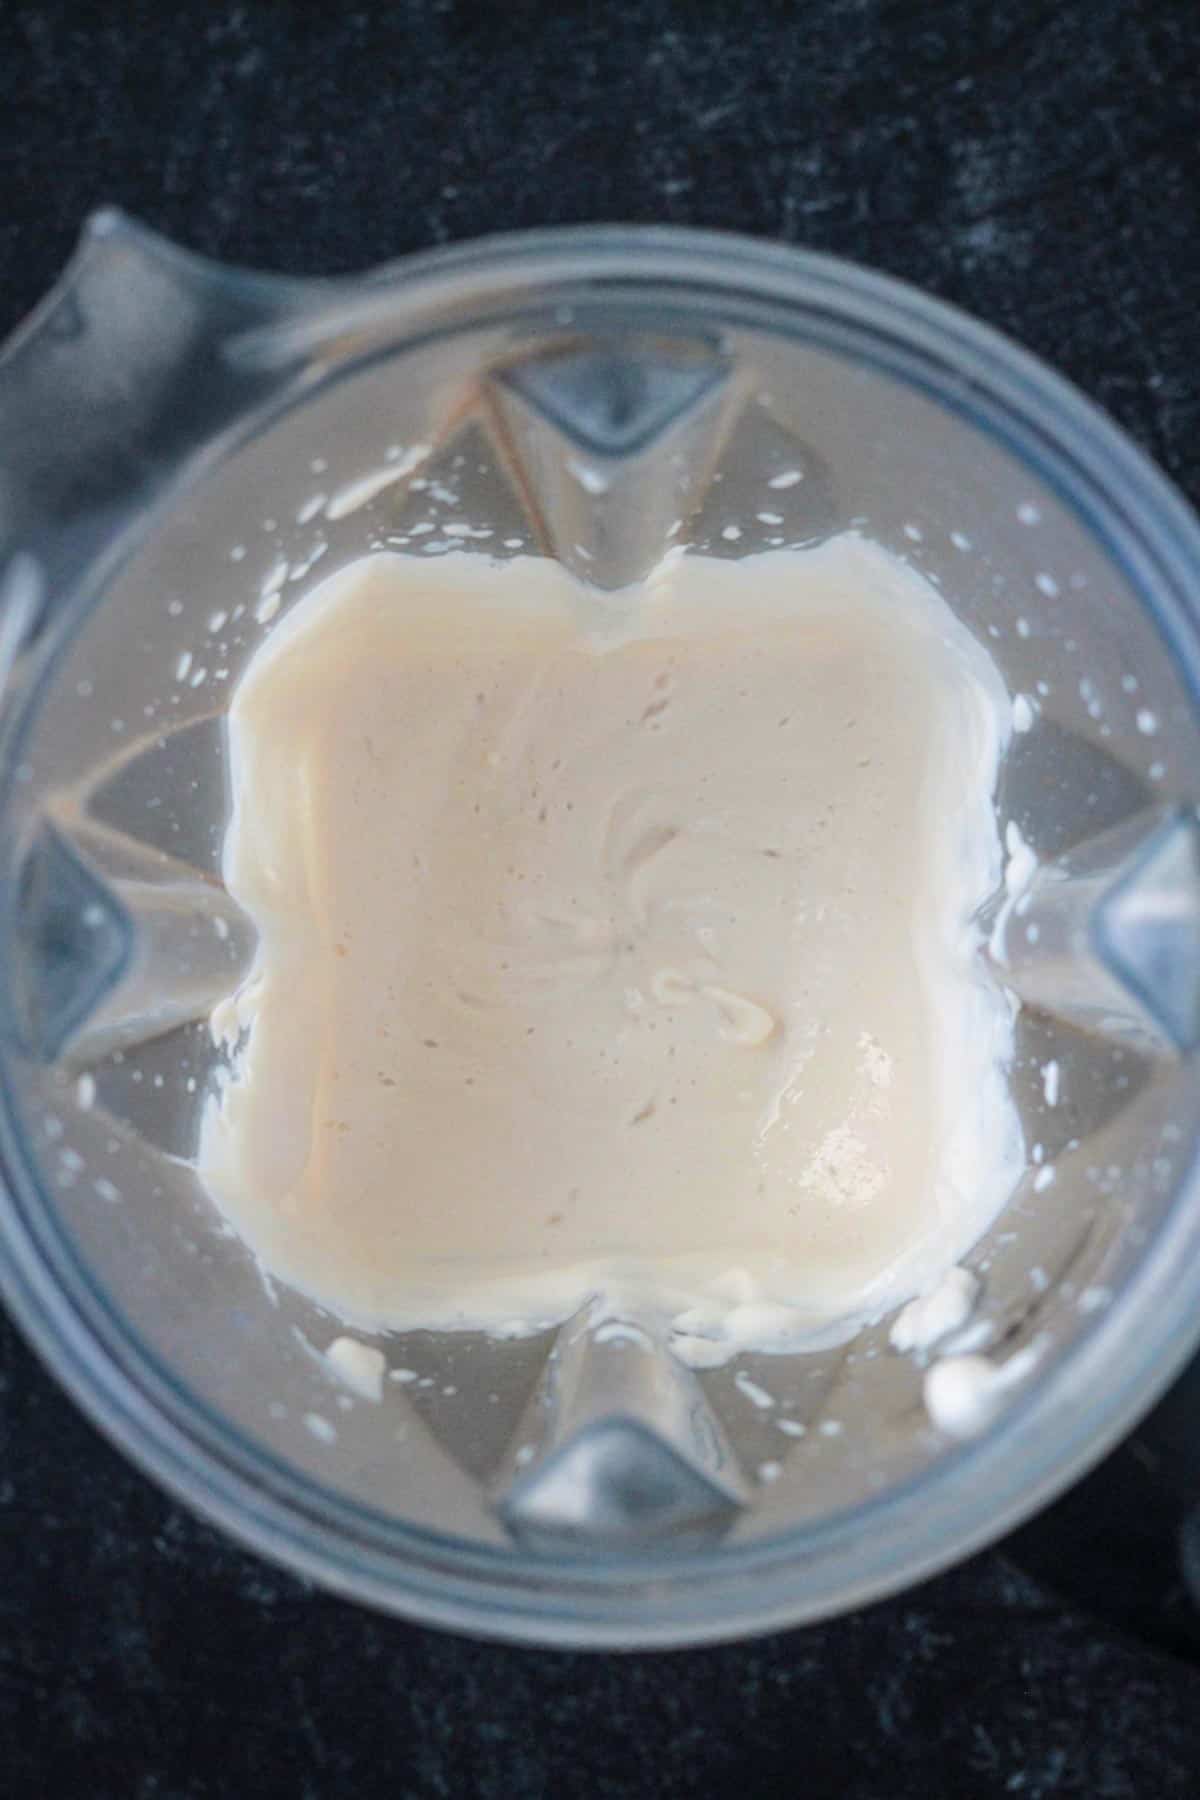 Ingredients fully puréed in a blender.